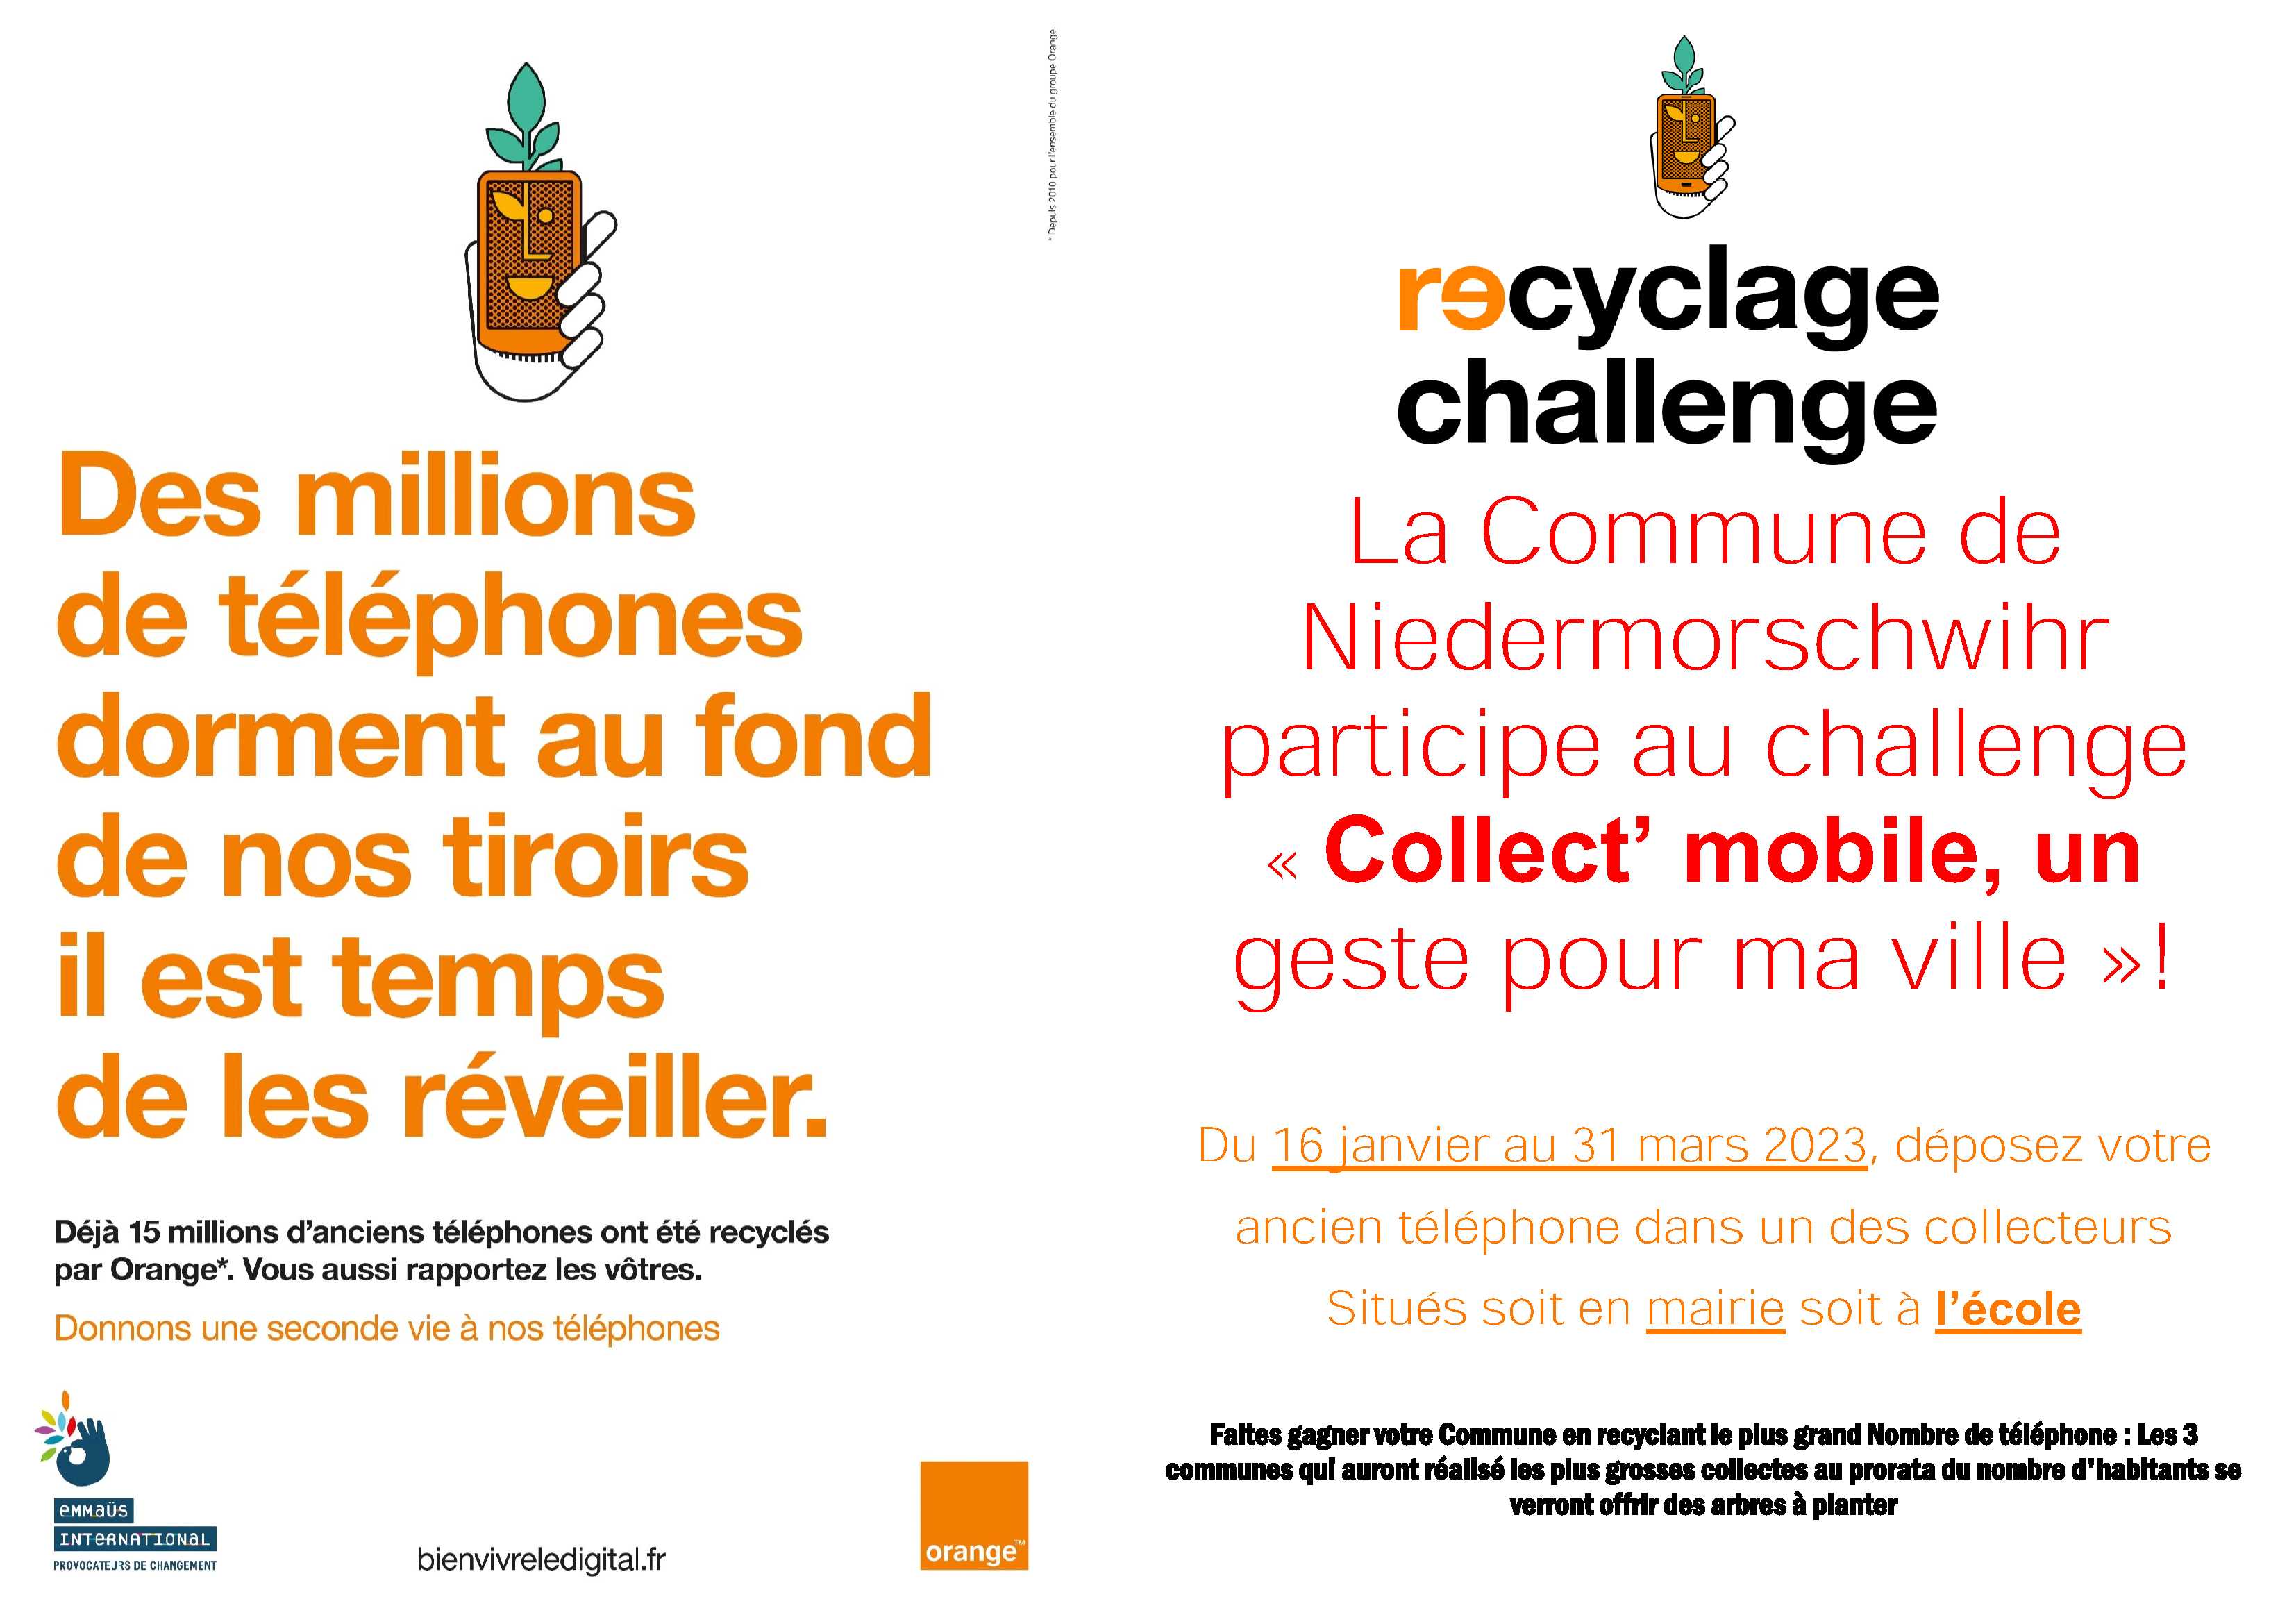 AfficheA3_recyclage_challenge_modifiable_V2_0.jpg